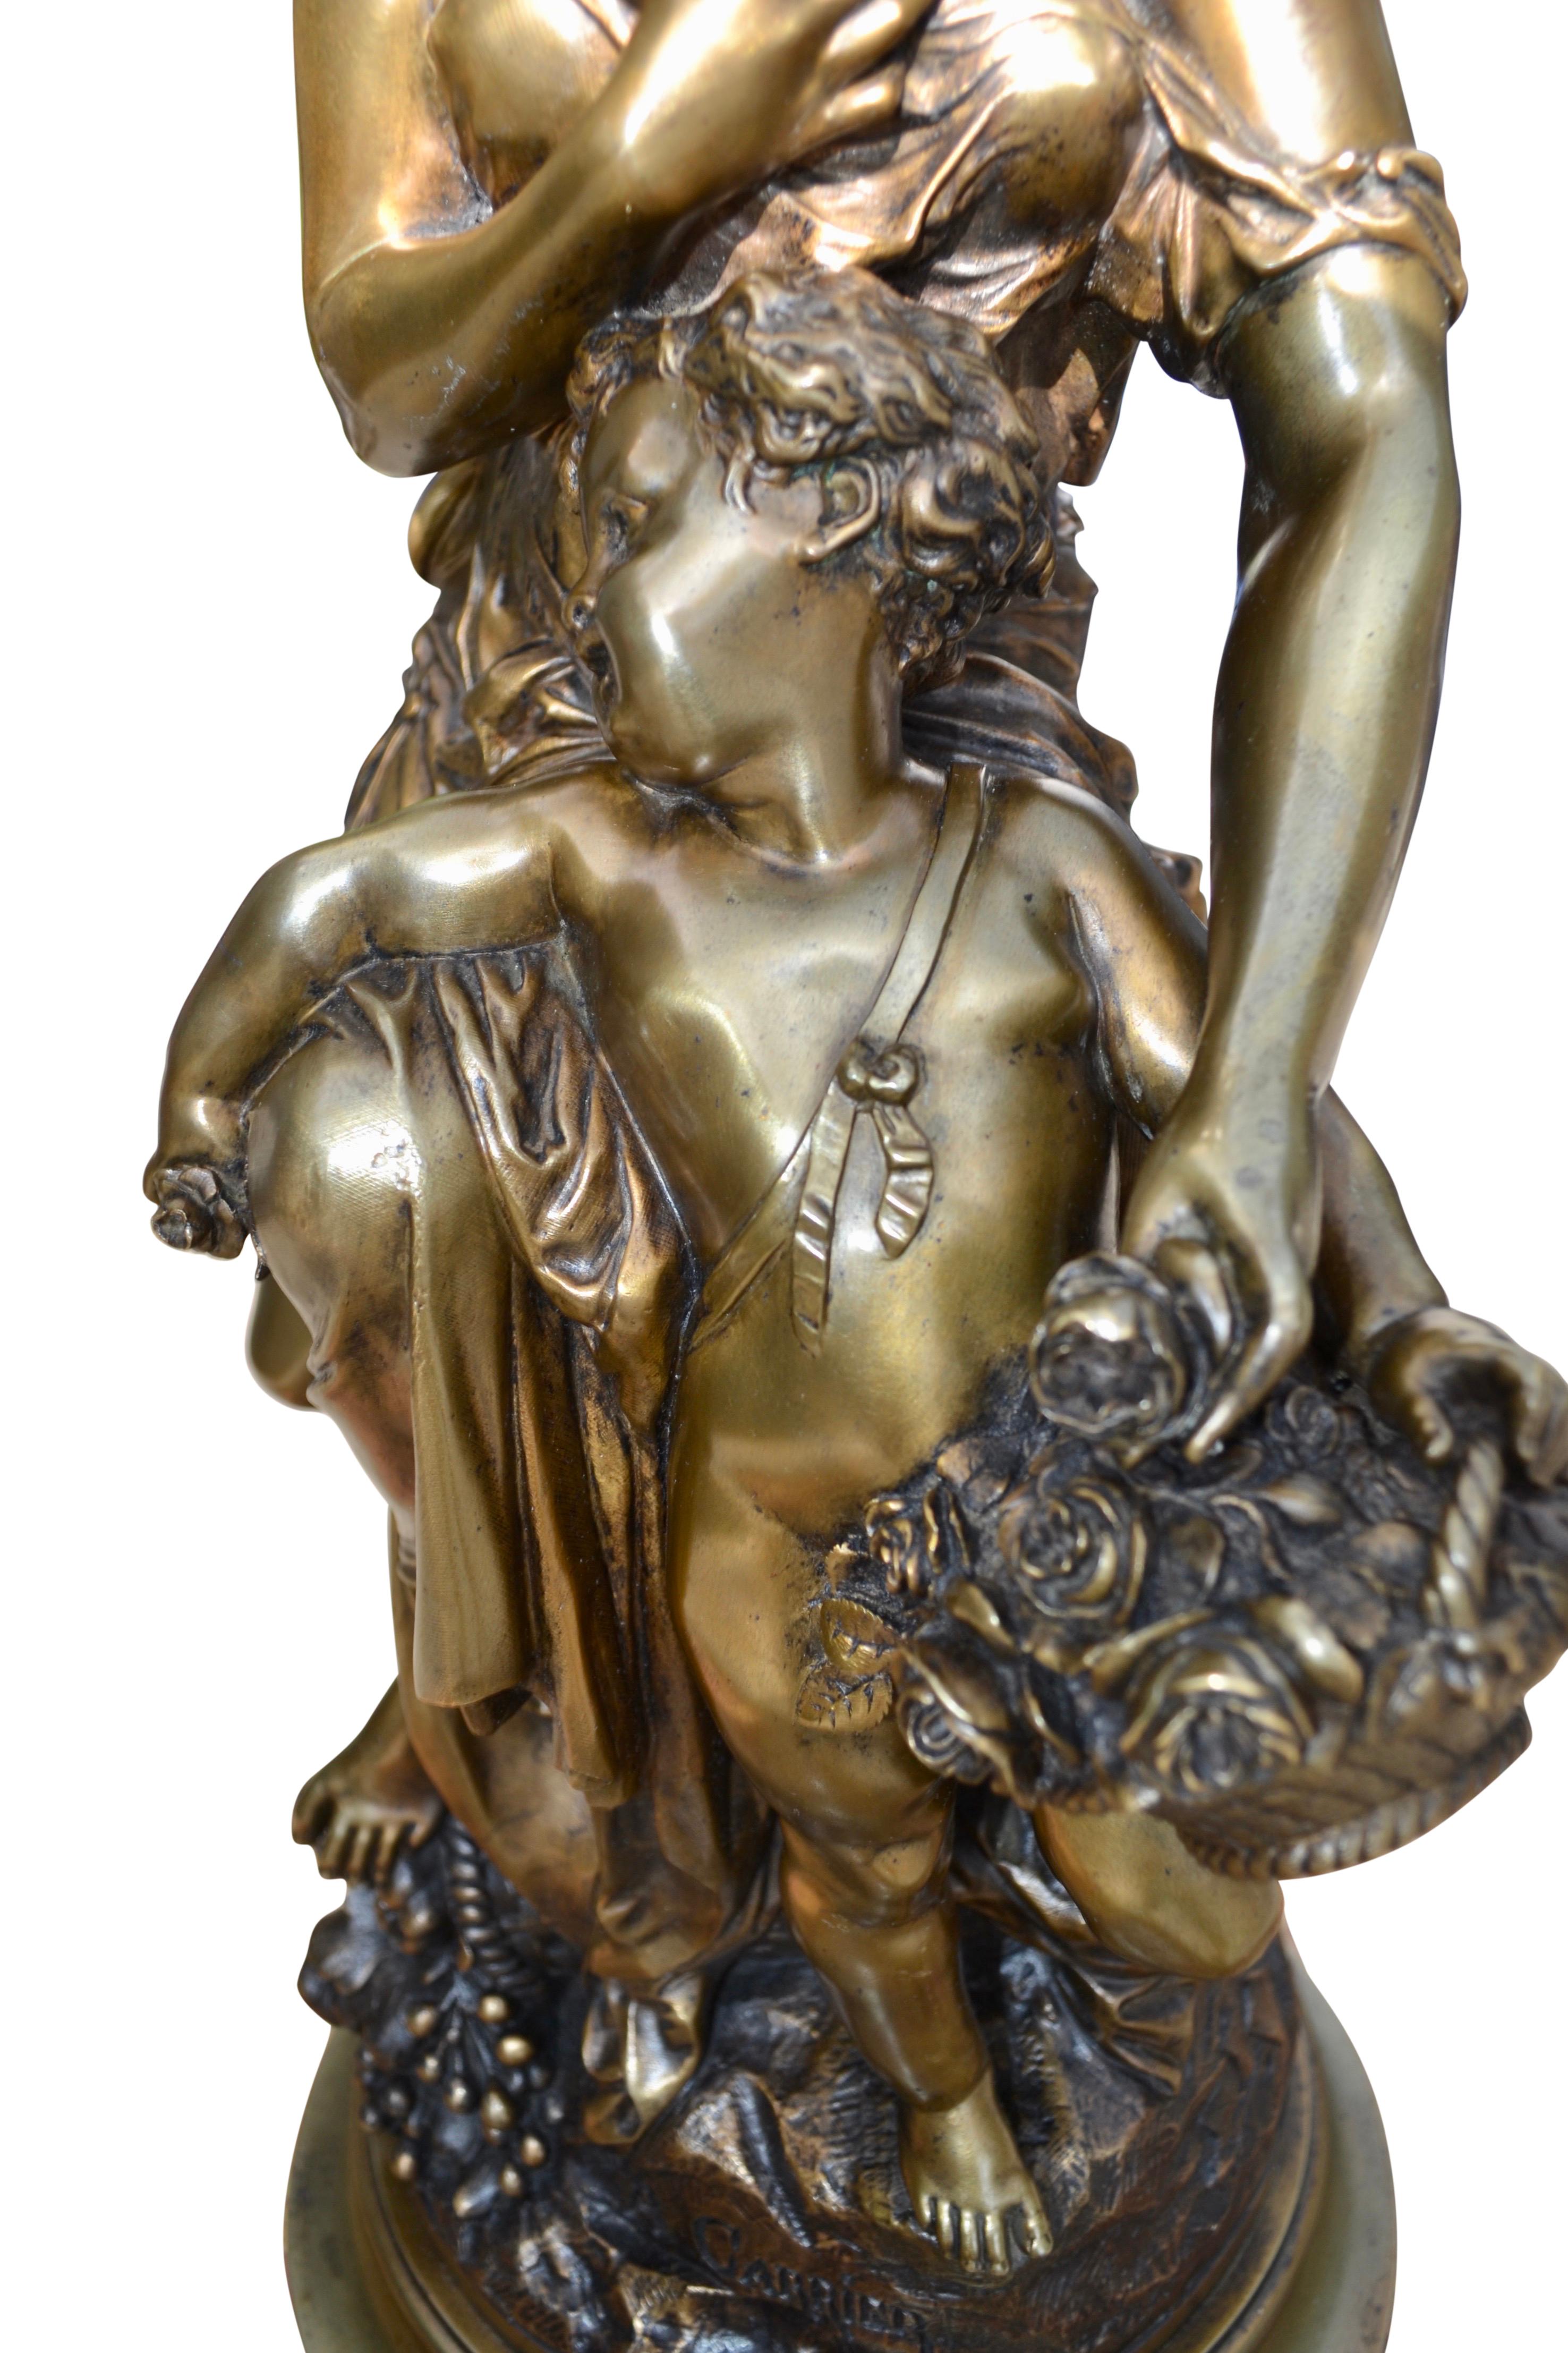  A 19 Century French  Gilt bronze Statue of Venus and Cupid  signed A. Carrier  1